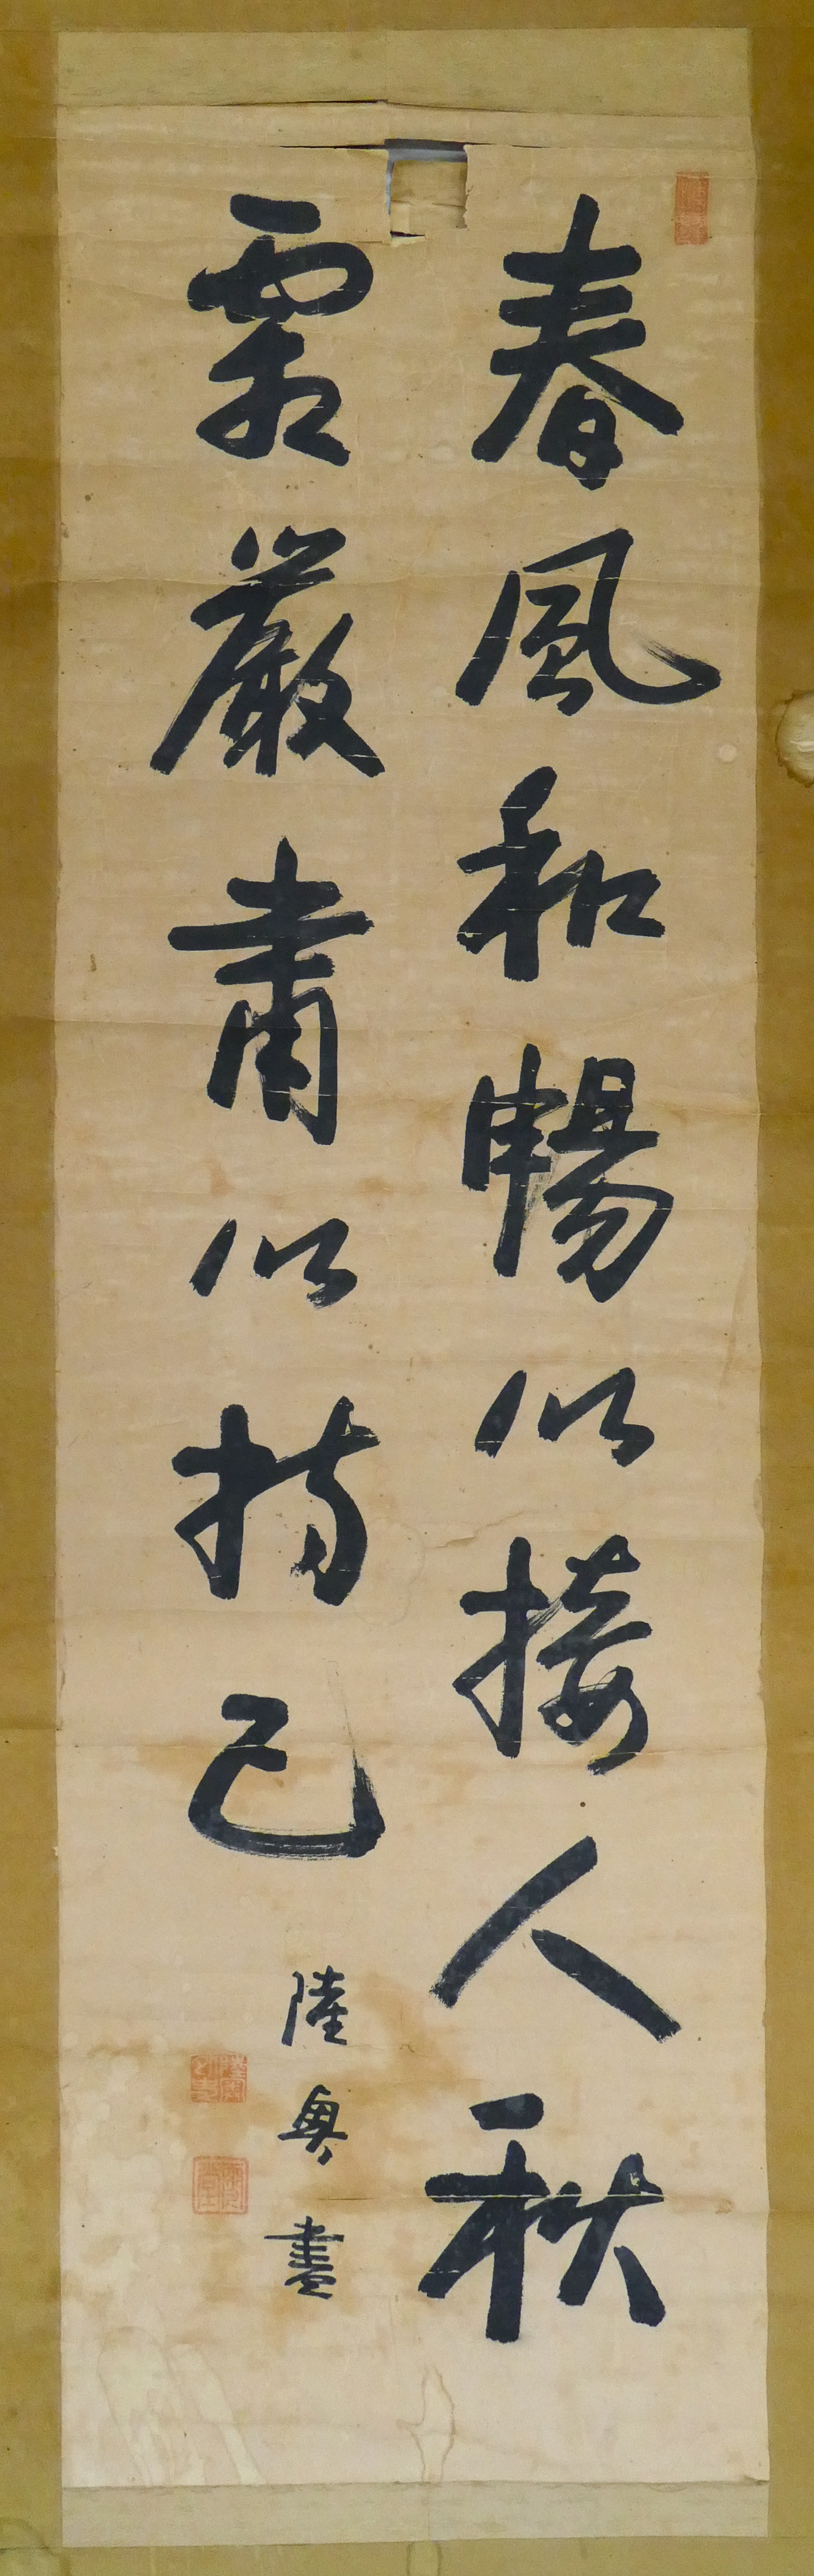 Old Chinese Calligraphy Scroll 3cfbb6